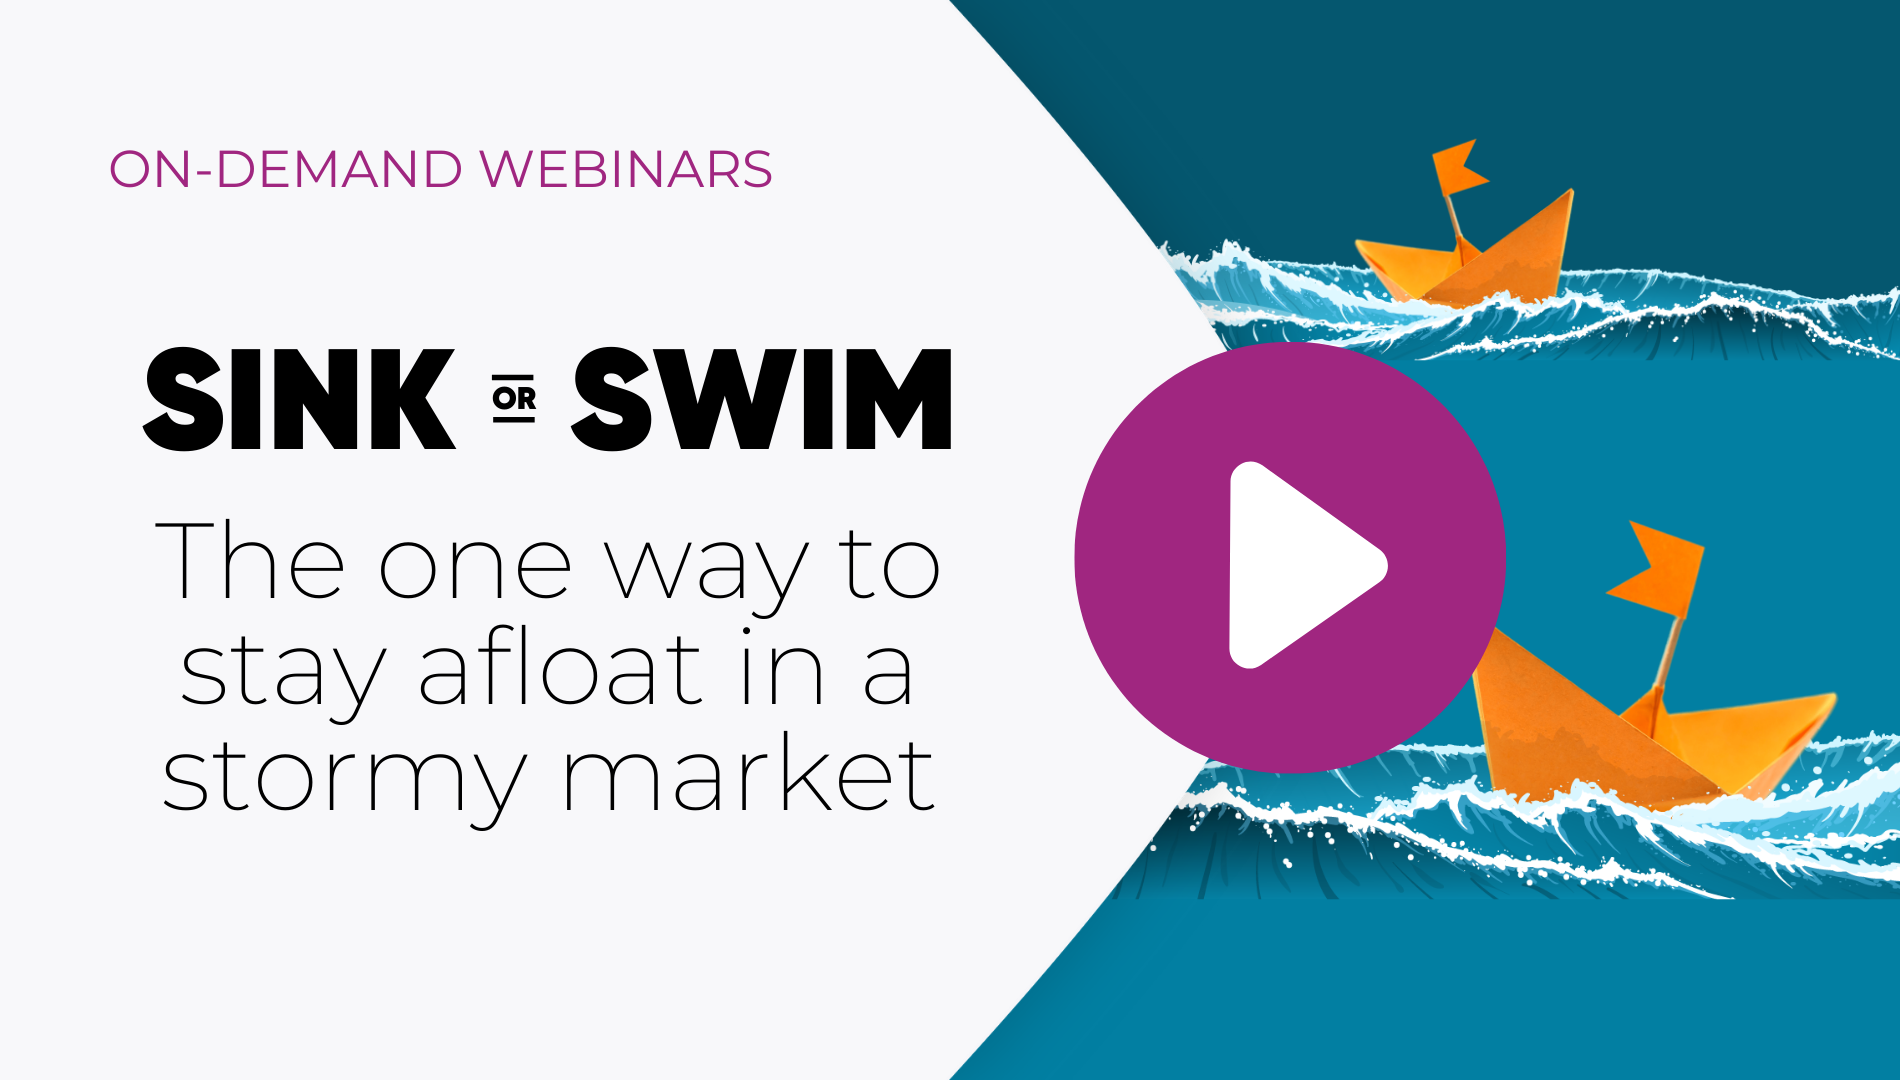 Sink or Swim: The One Way to Stay Afloat in a Stormy Market